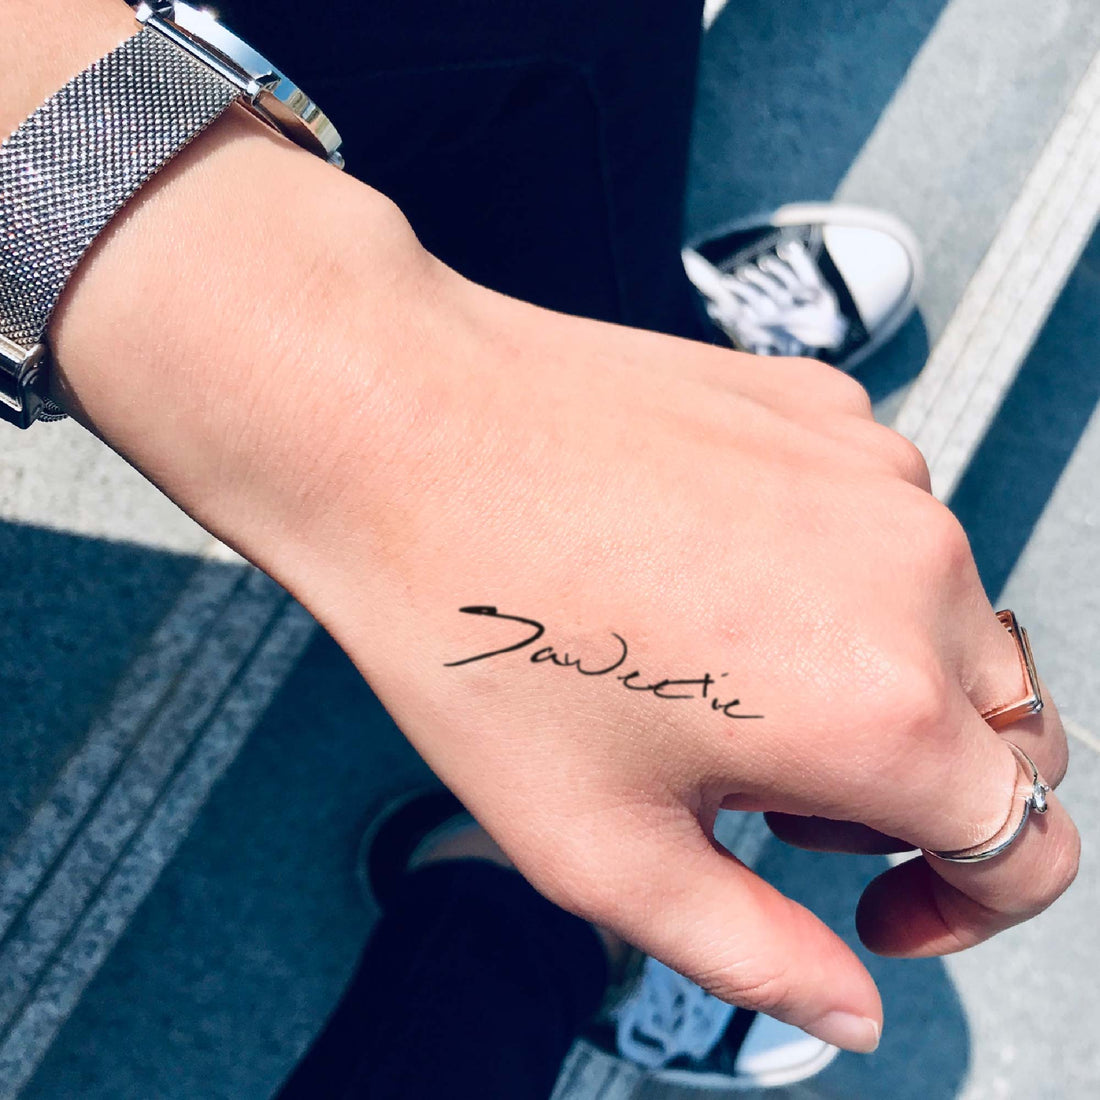 Saweetie custom temporary tattoo sticker design idea inspiration meanings removal arm wrist hand words font name signature calligraphy lyrics tour concert outfits merch accessory gift souvenir costumes wear dress up code